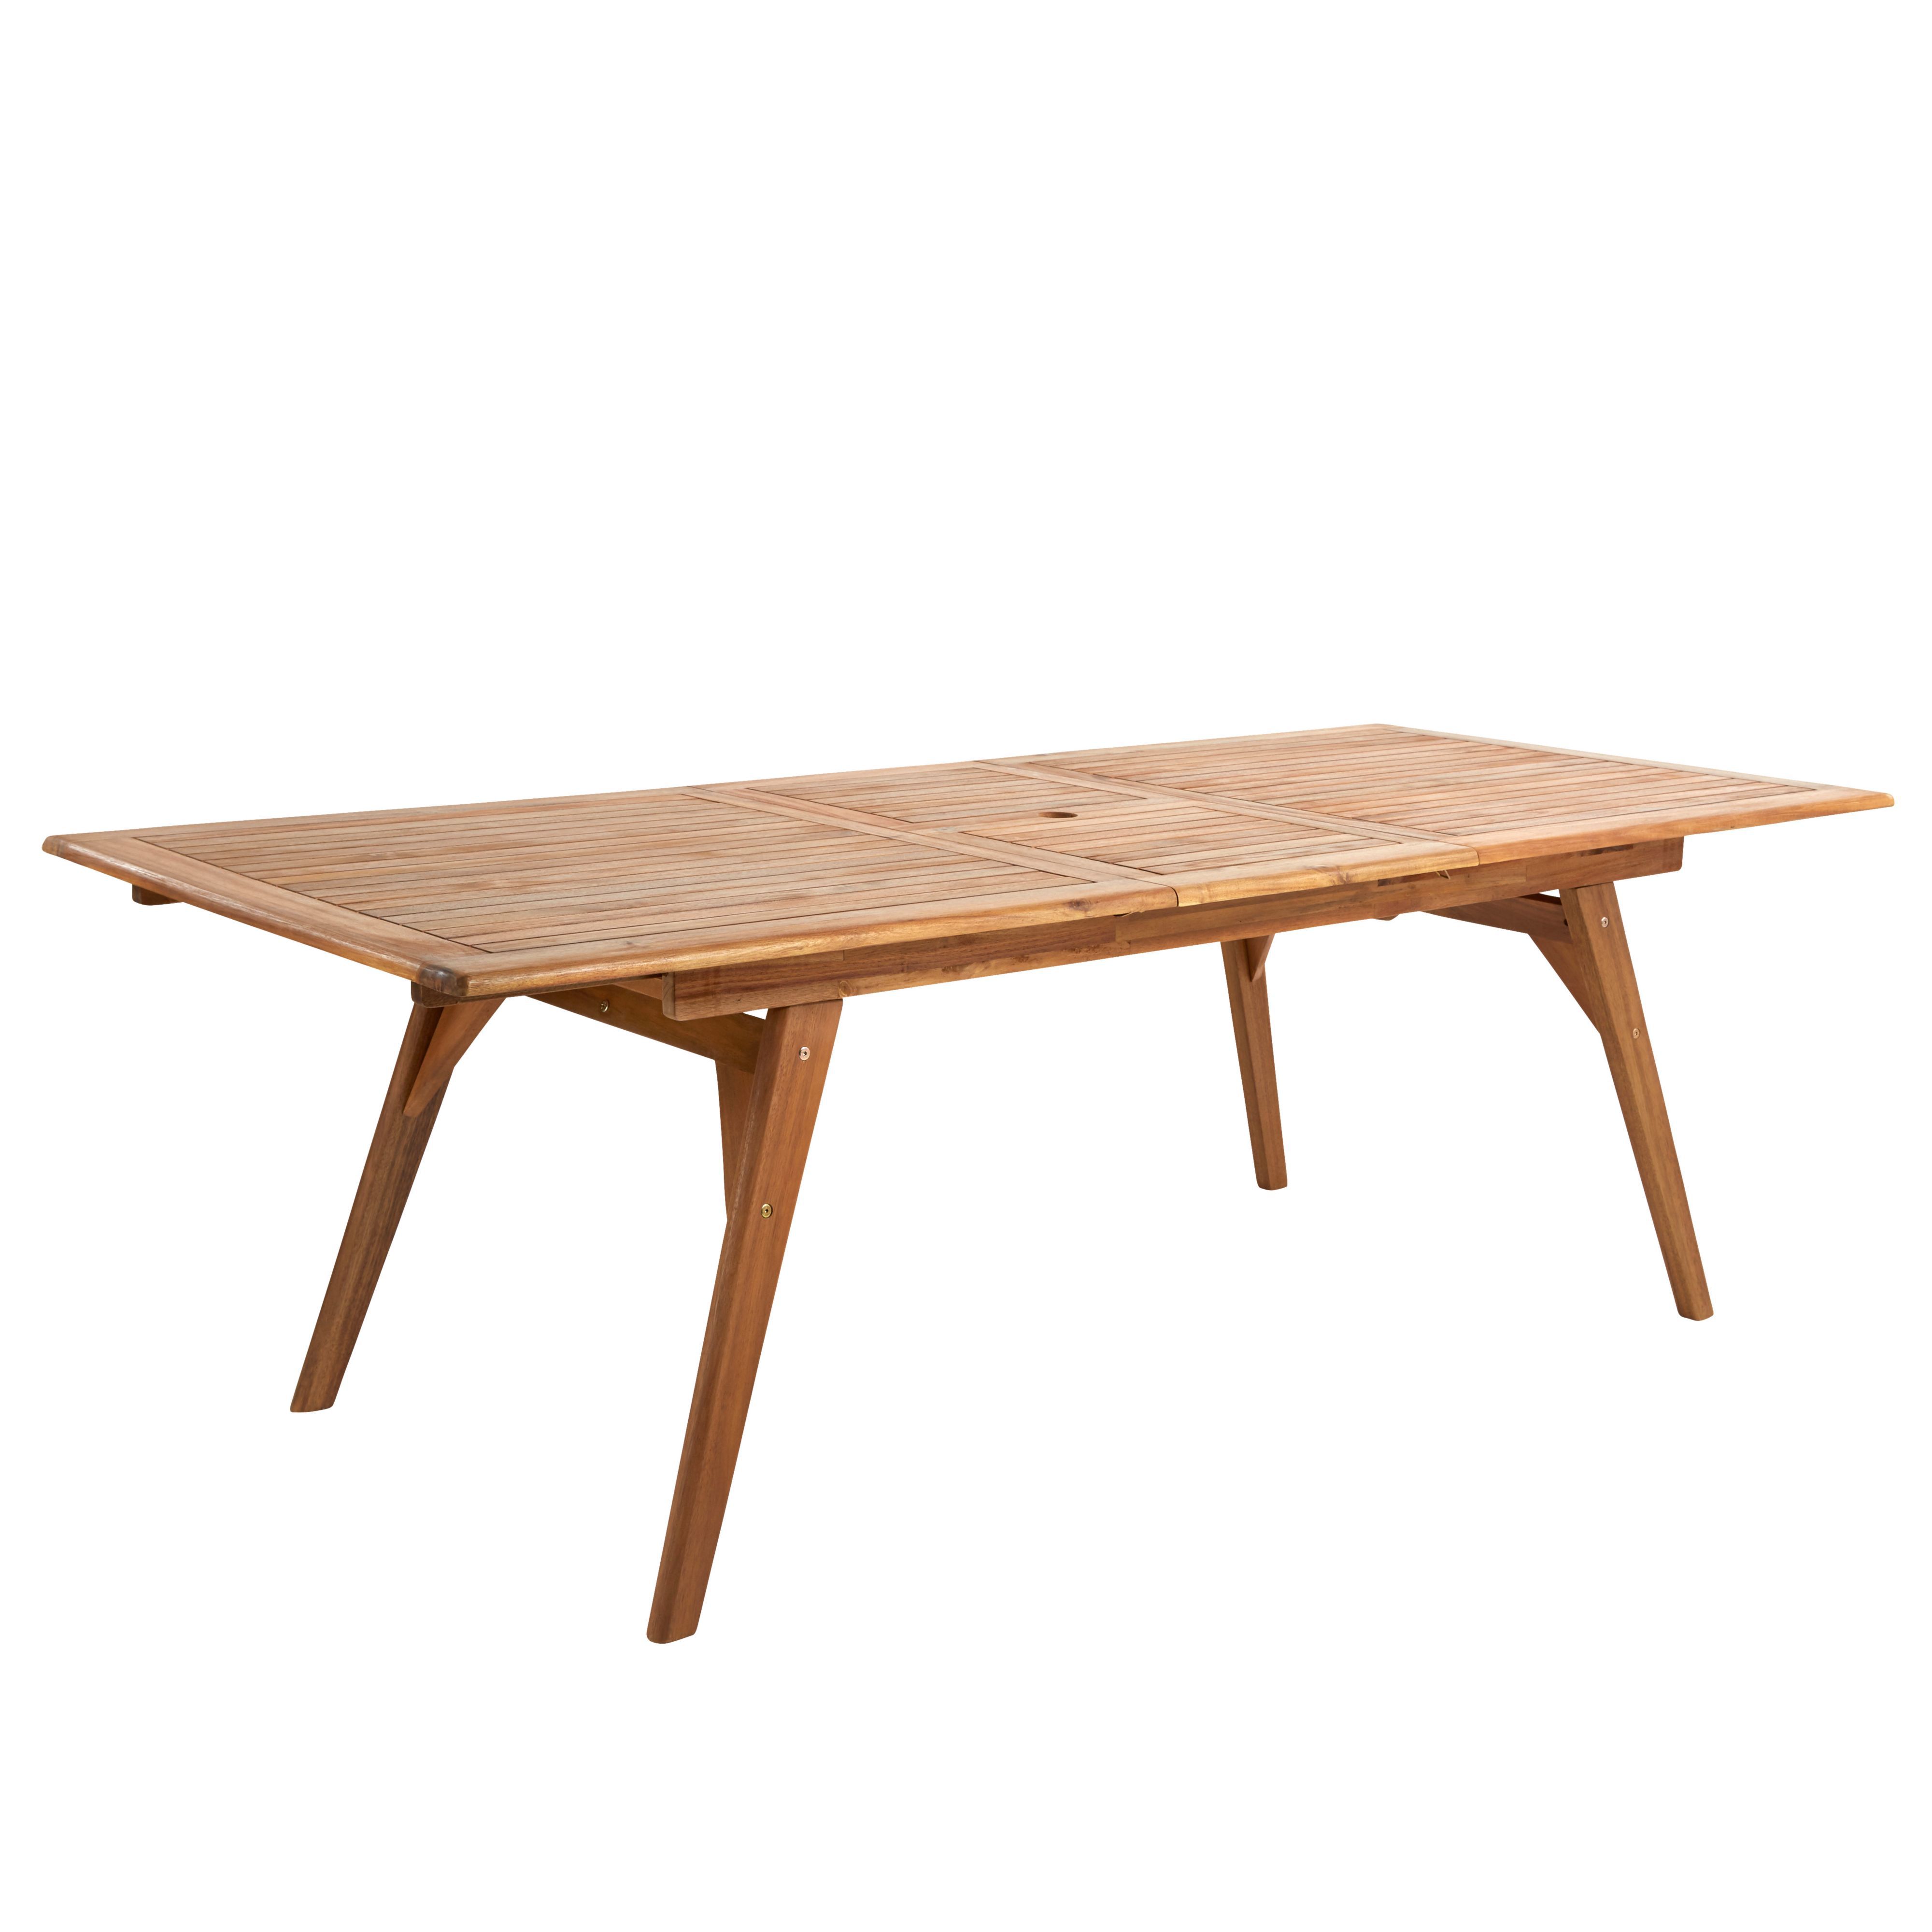 Victoria Wooden 6-8 seater Dining table | Departments | DIY at B&Q